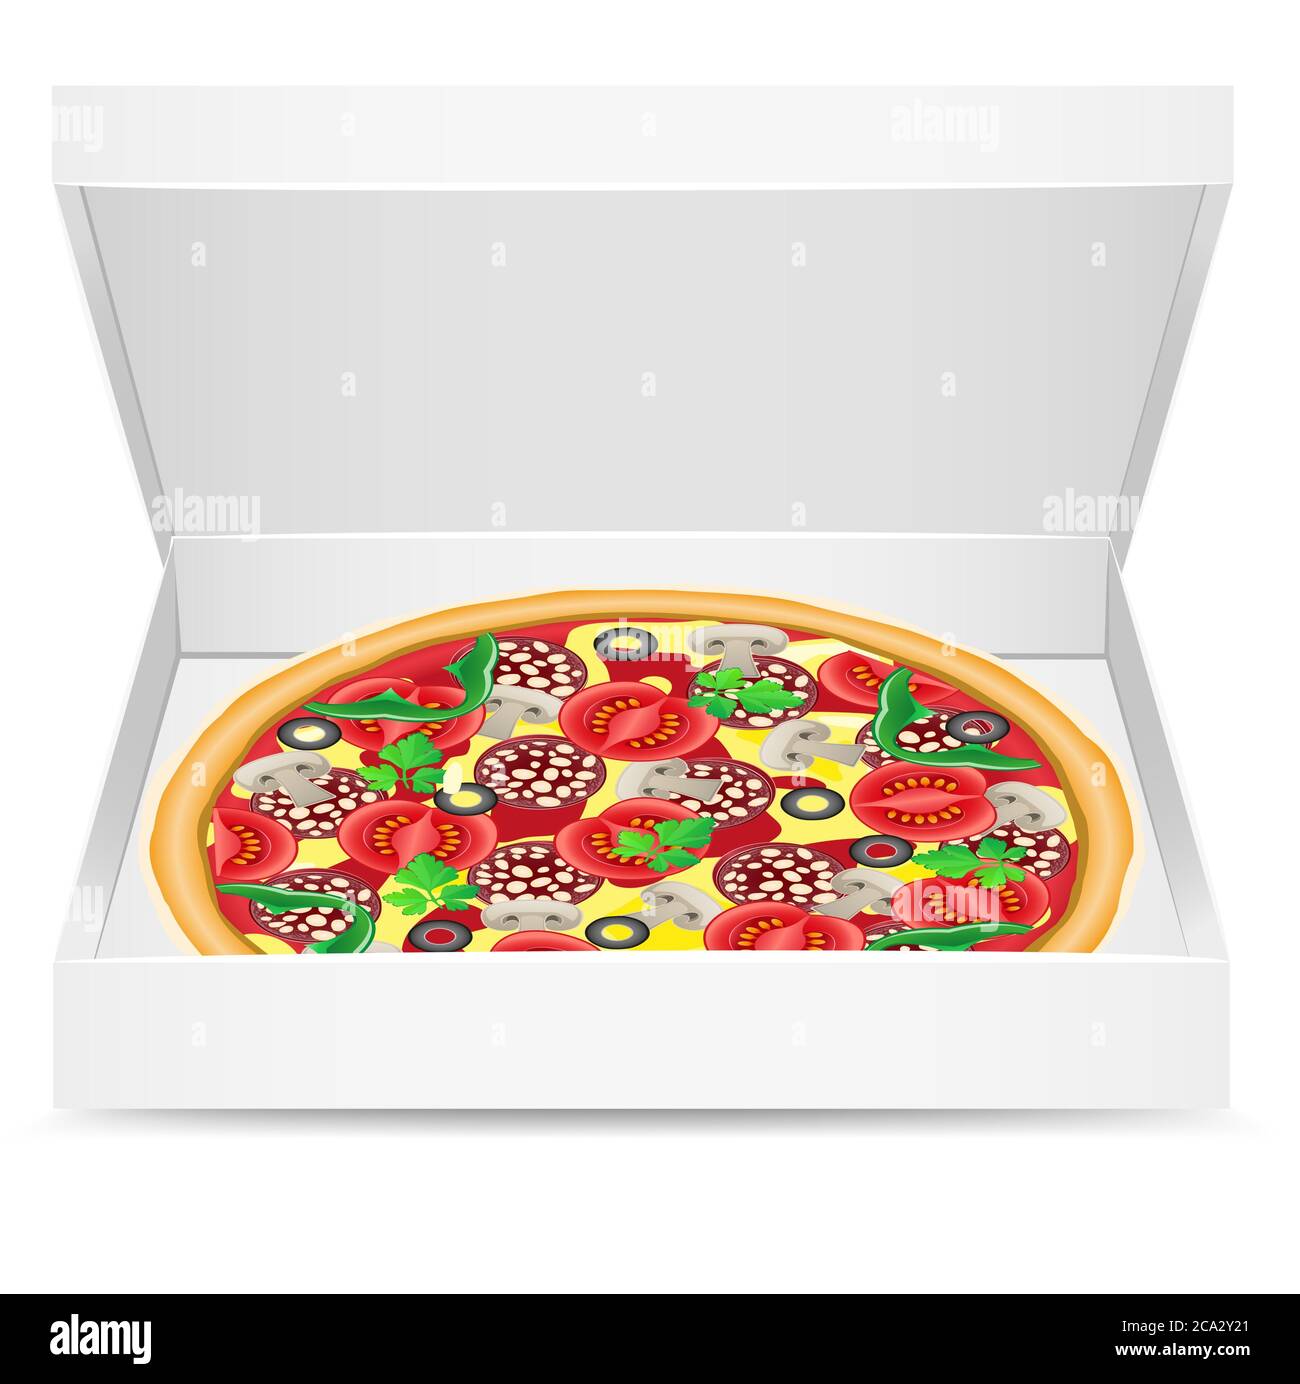 pizza is in a cardboard box vector illustration. Stock Photo